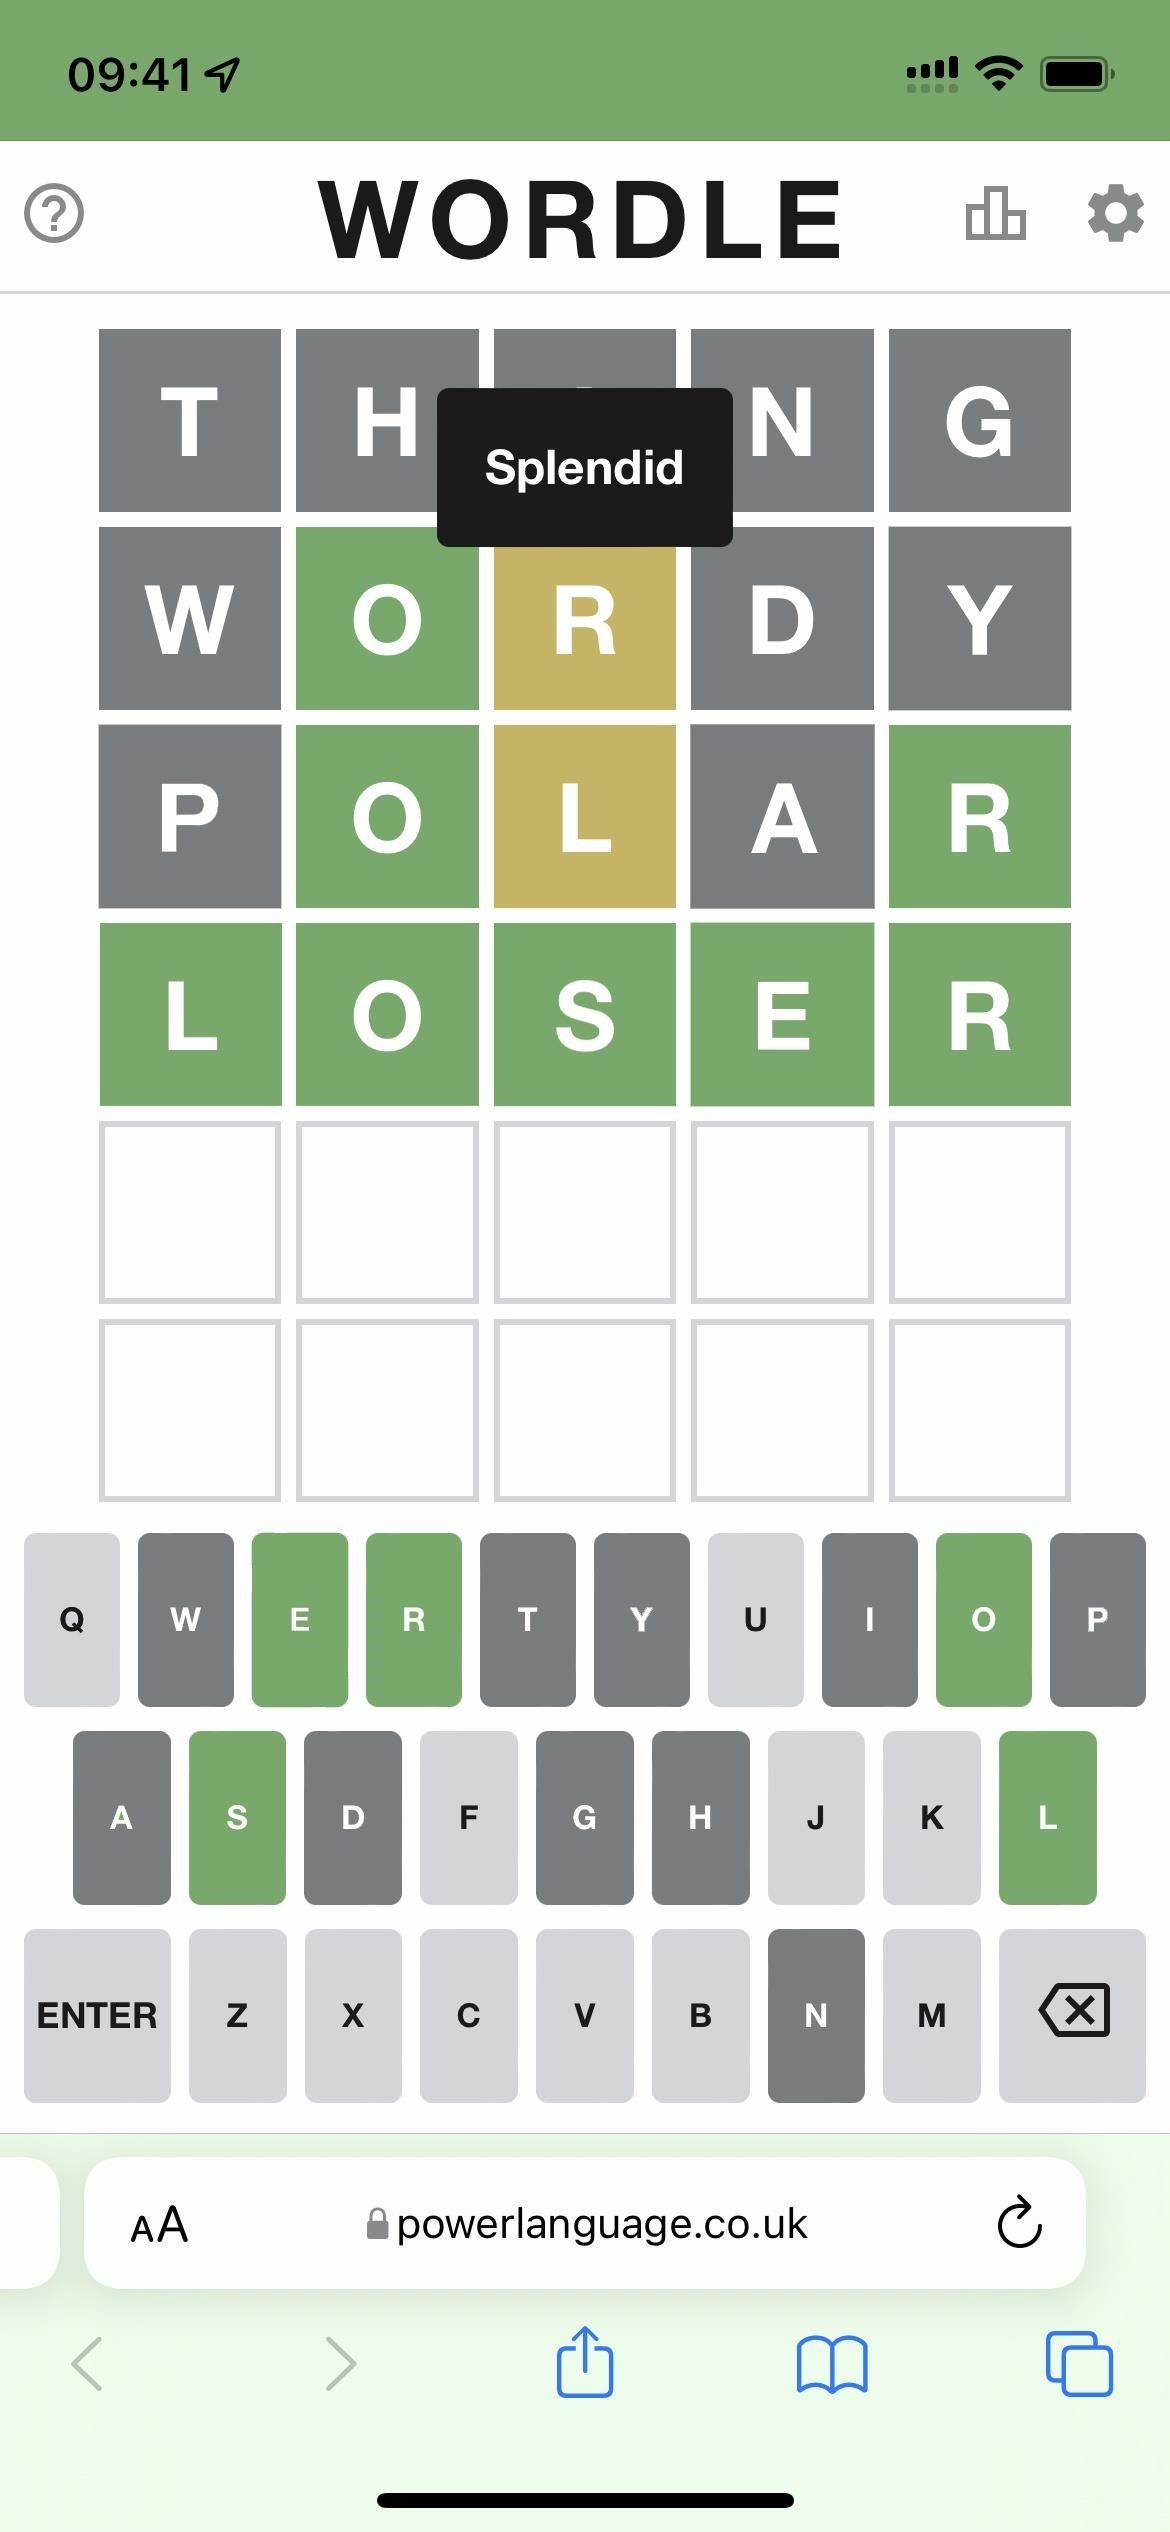 How to Install the Real Wordle Game on Your Phone — Not a Fake Wordle Clone